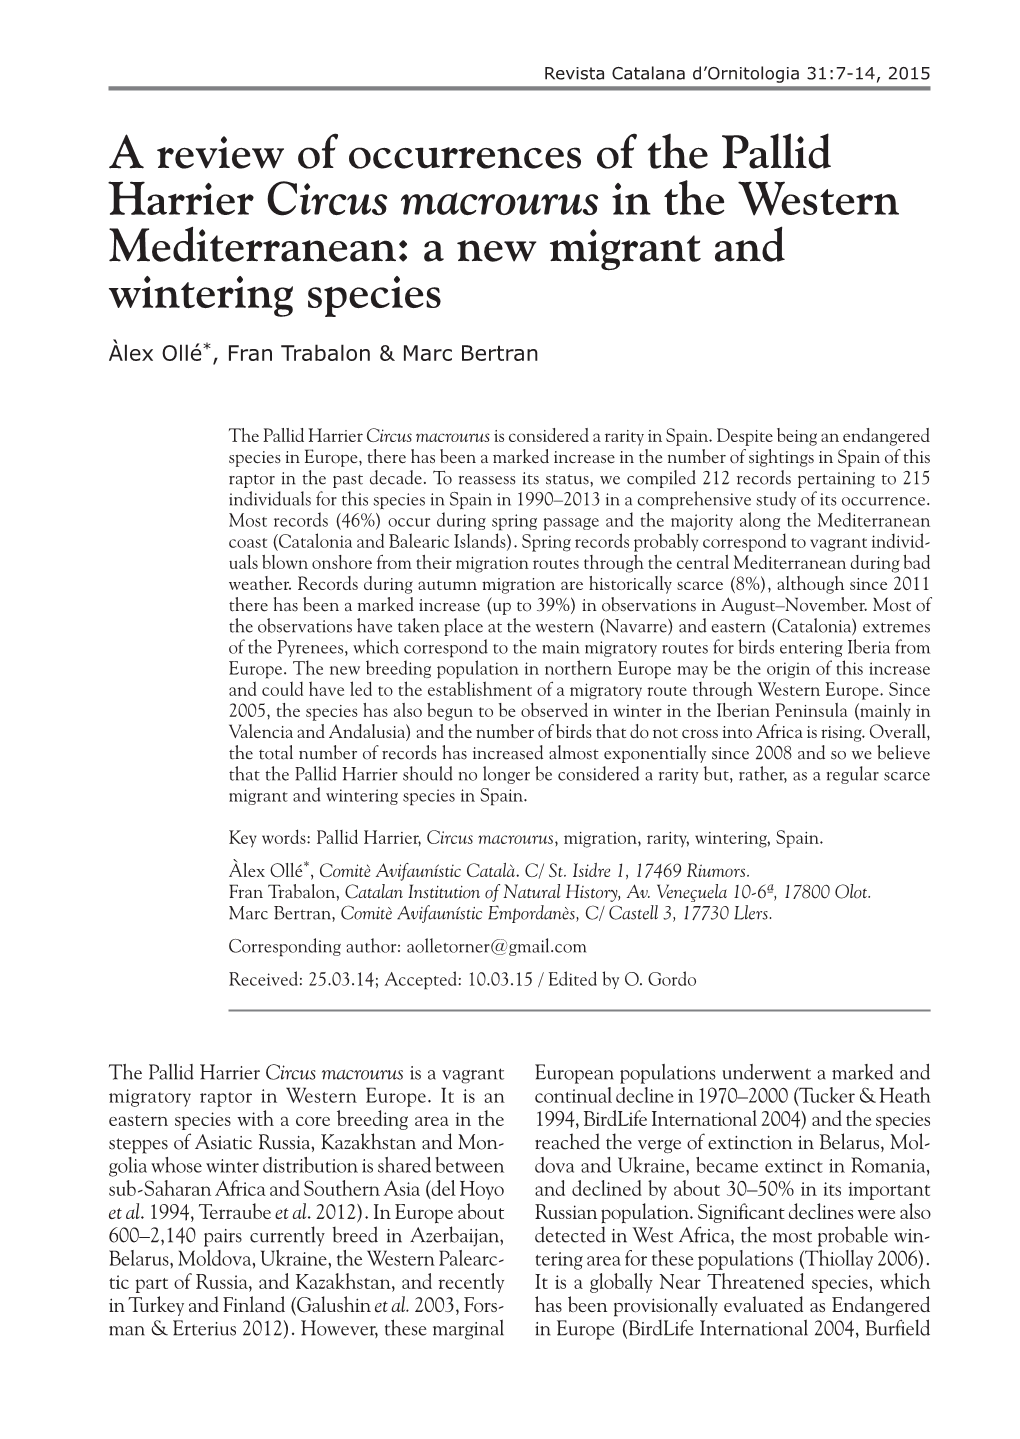 A Review of Occurrences of the Pallid Harrier Circus Macrourus in the Western Mediterranean: a New Migrant and Wintering Species